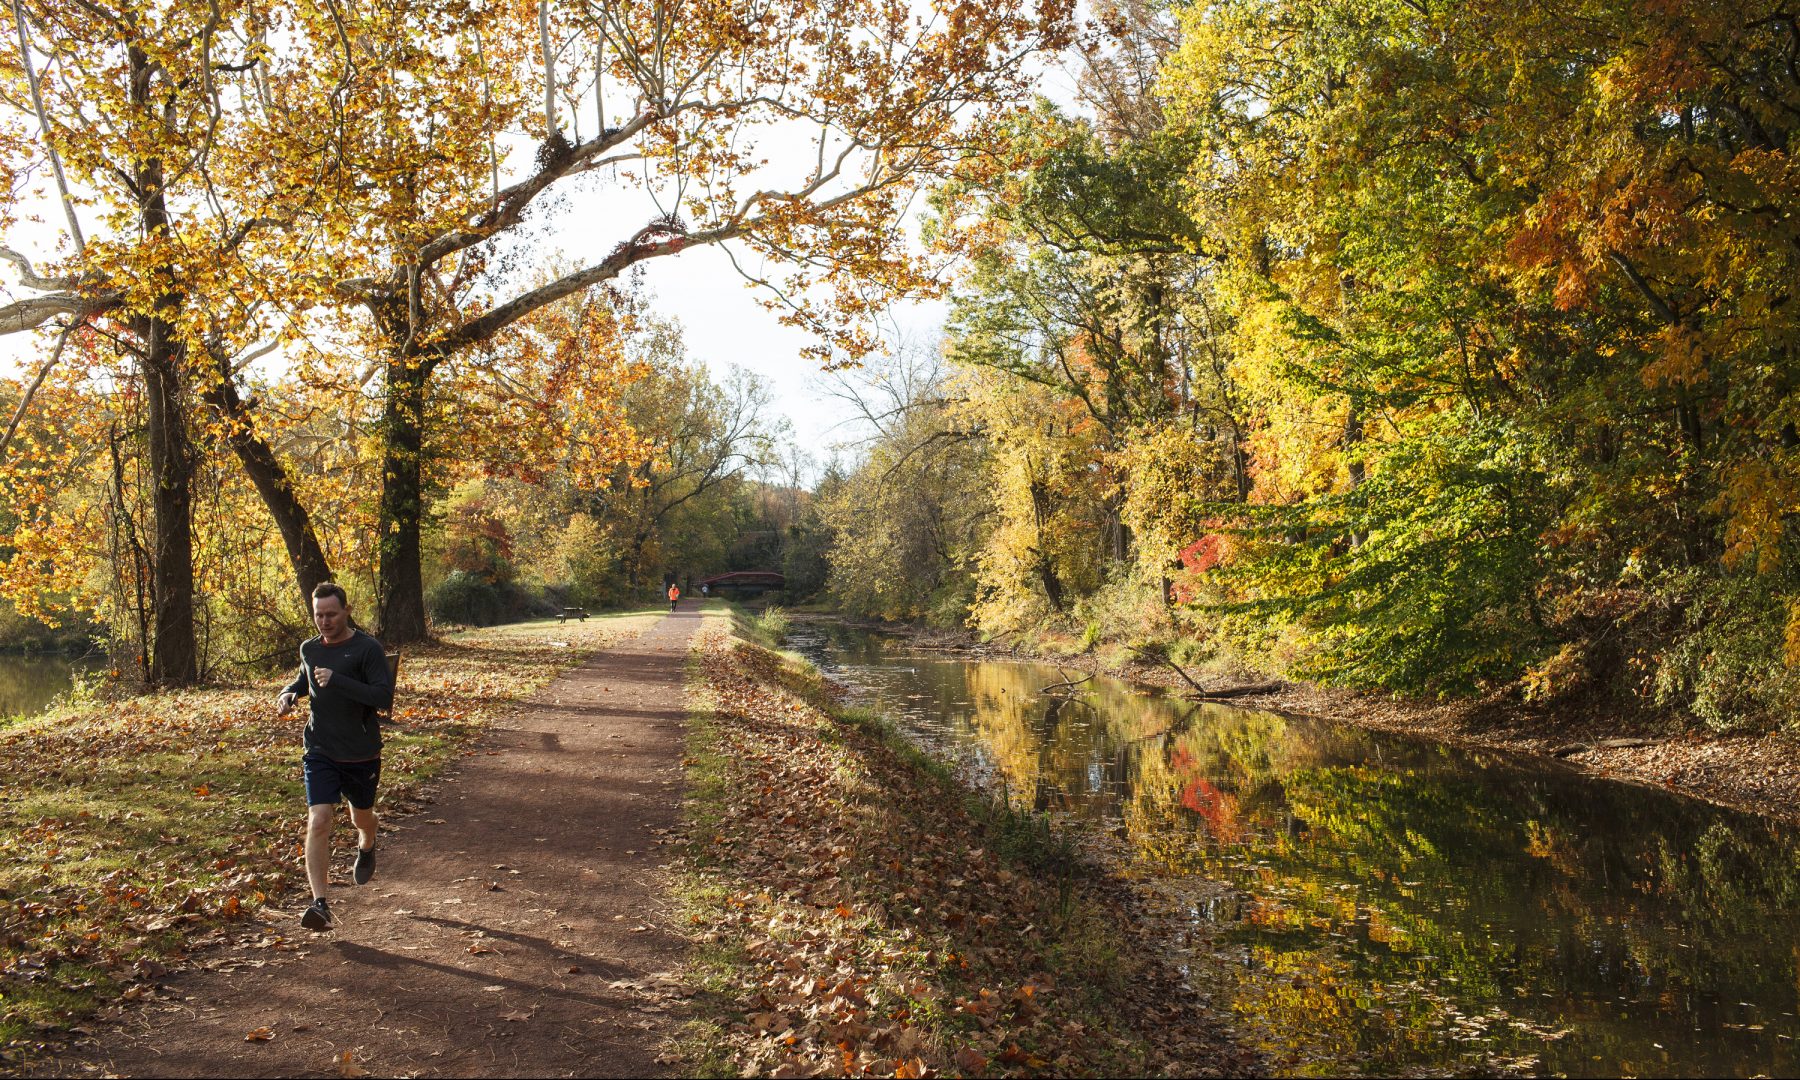 In this Saturday, Oct. 24, 2015, photo, a man runs along the canal path in Delaware Canal State Park at Washington Crossing, Pa. The canal path, the central feature of the Delaware Canal State Park, runs 60 miles parallel to the Delaware River in southeastern Pennsylvania.